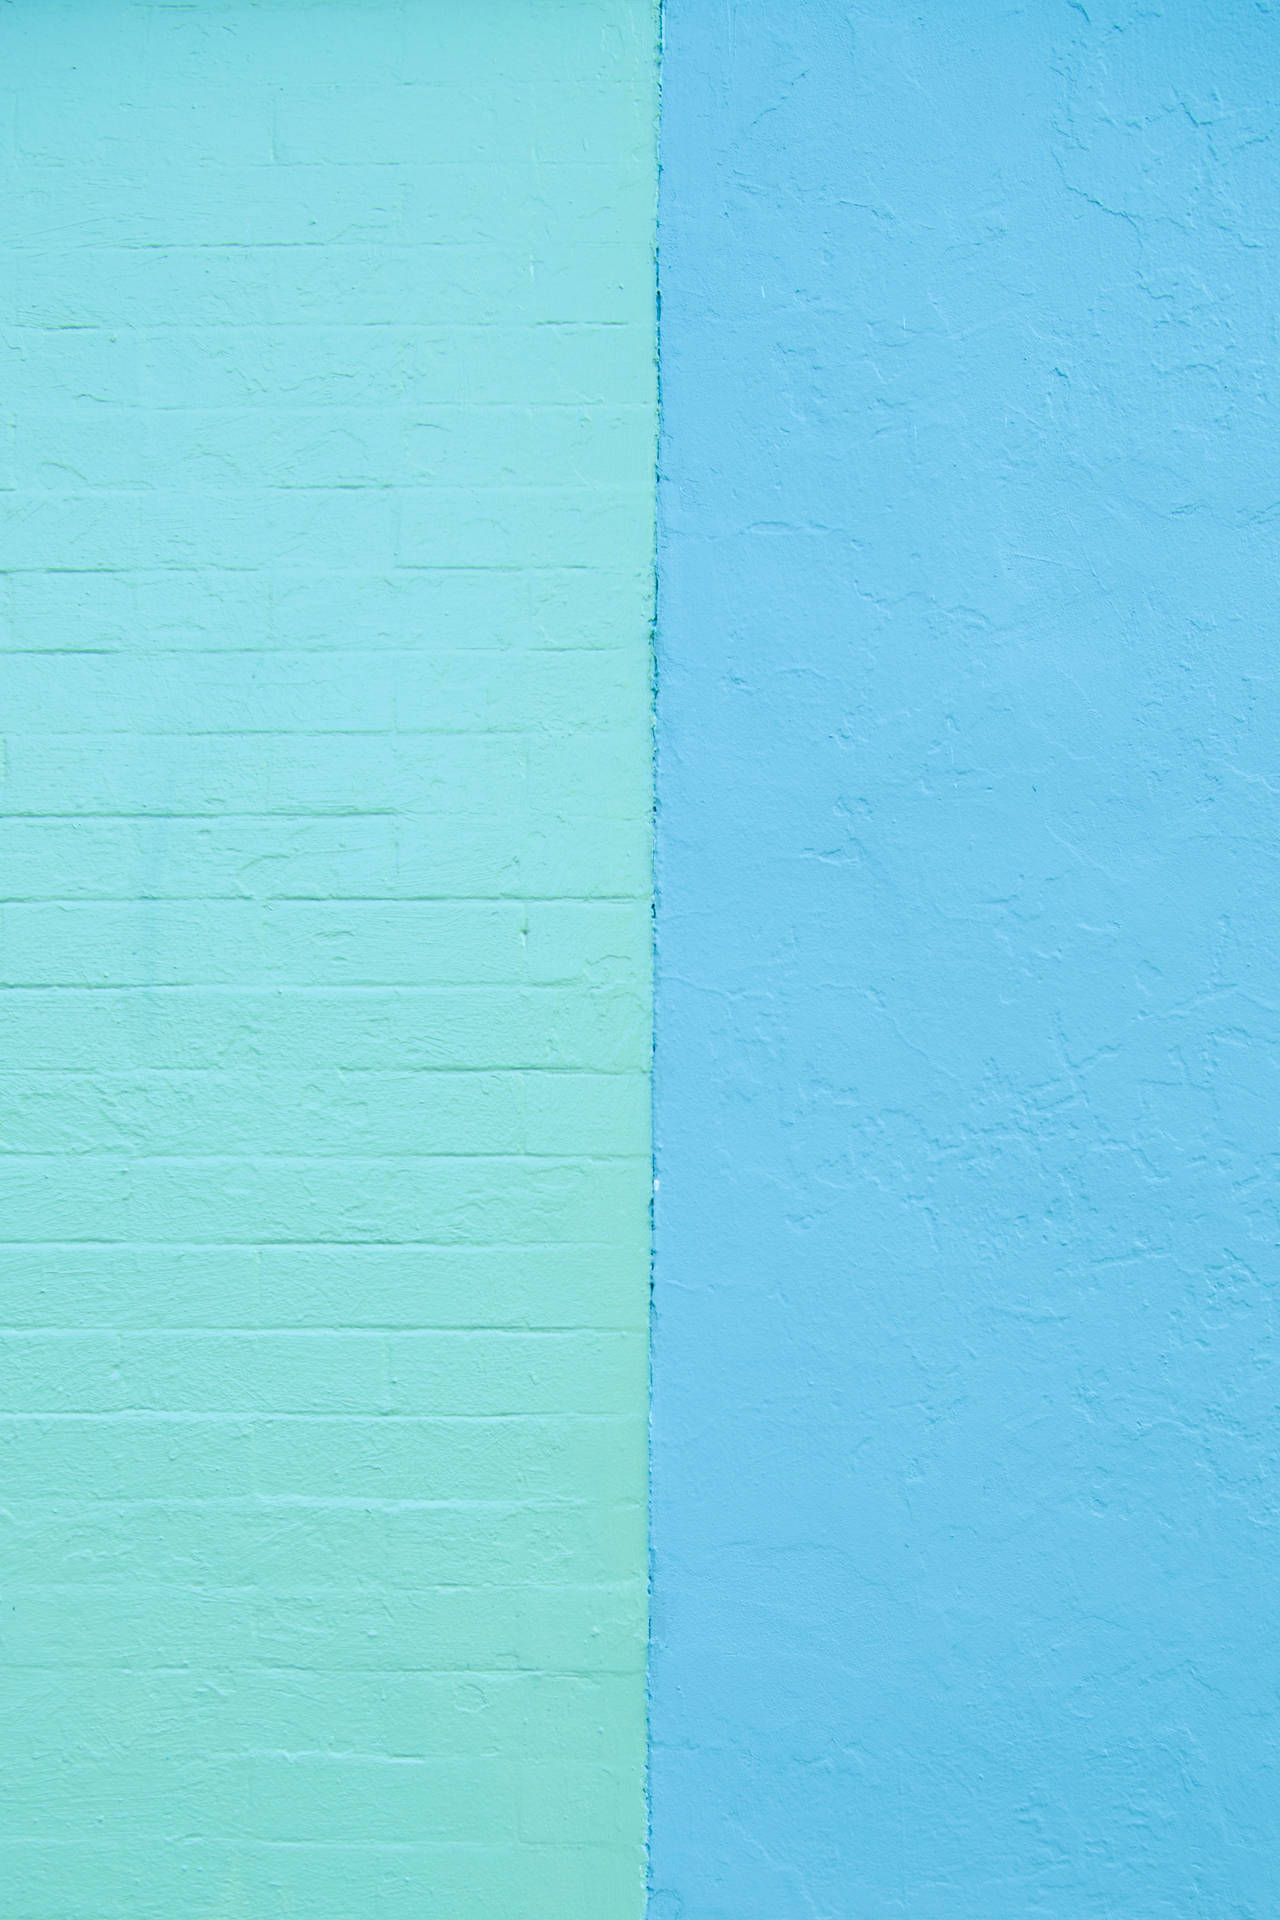 Turquoise And Light Blue Brick Wall Texture